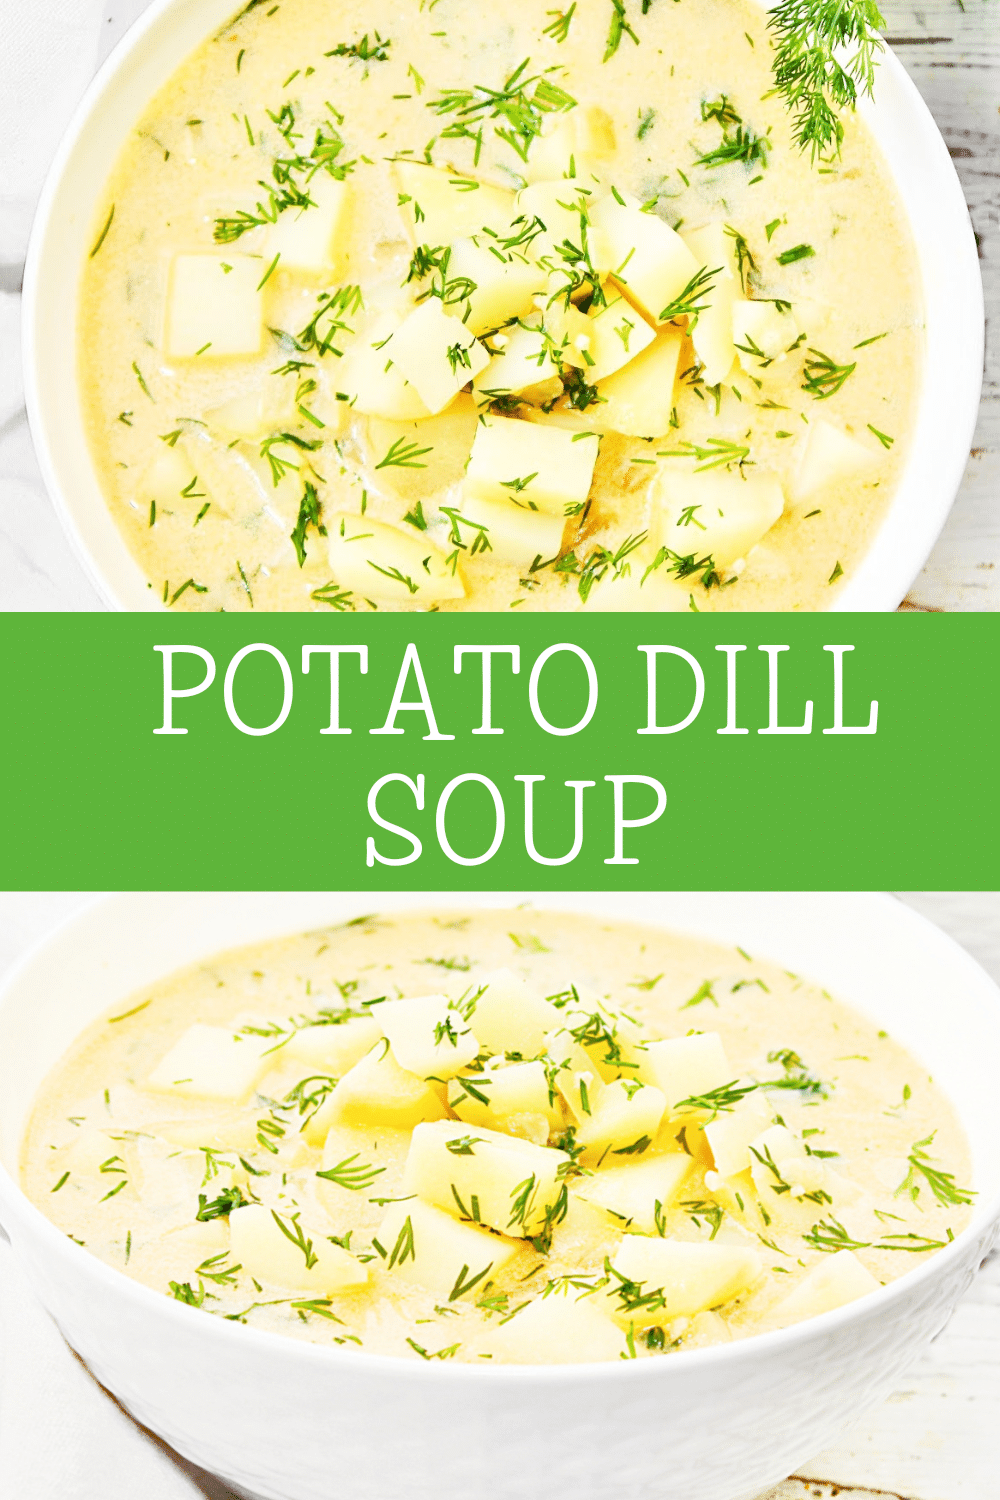 Potato Dill Soup ~ Chunky potato soup infused with the bright and herbaceous flavor of fresh dill. Ready to serve in under 30 minutes! via @thiswifecooks